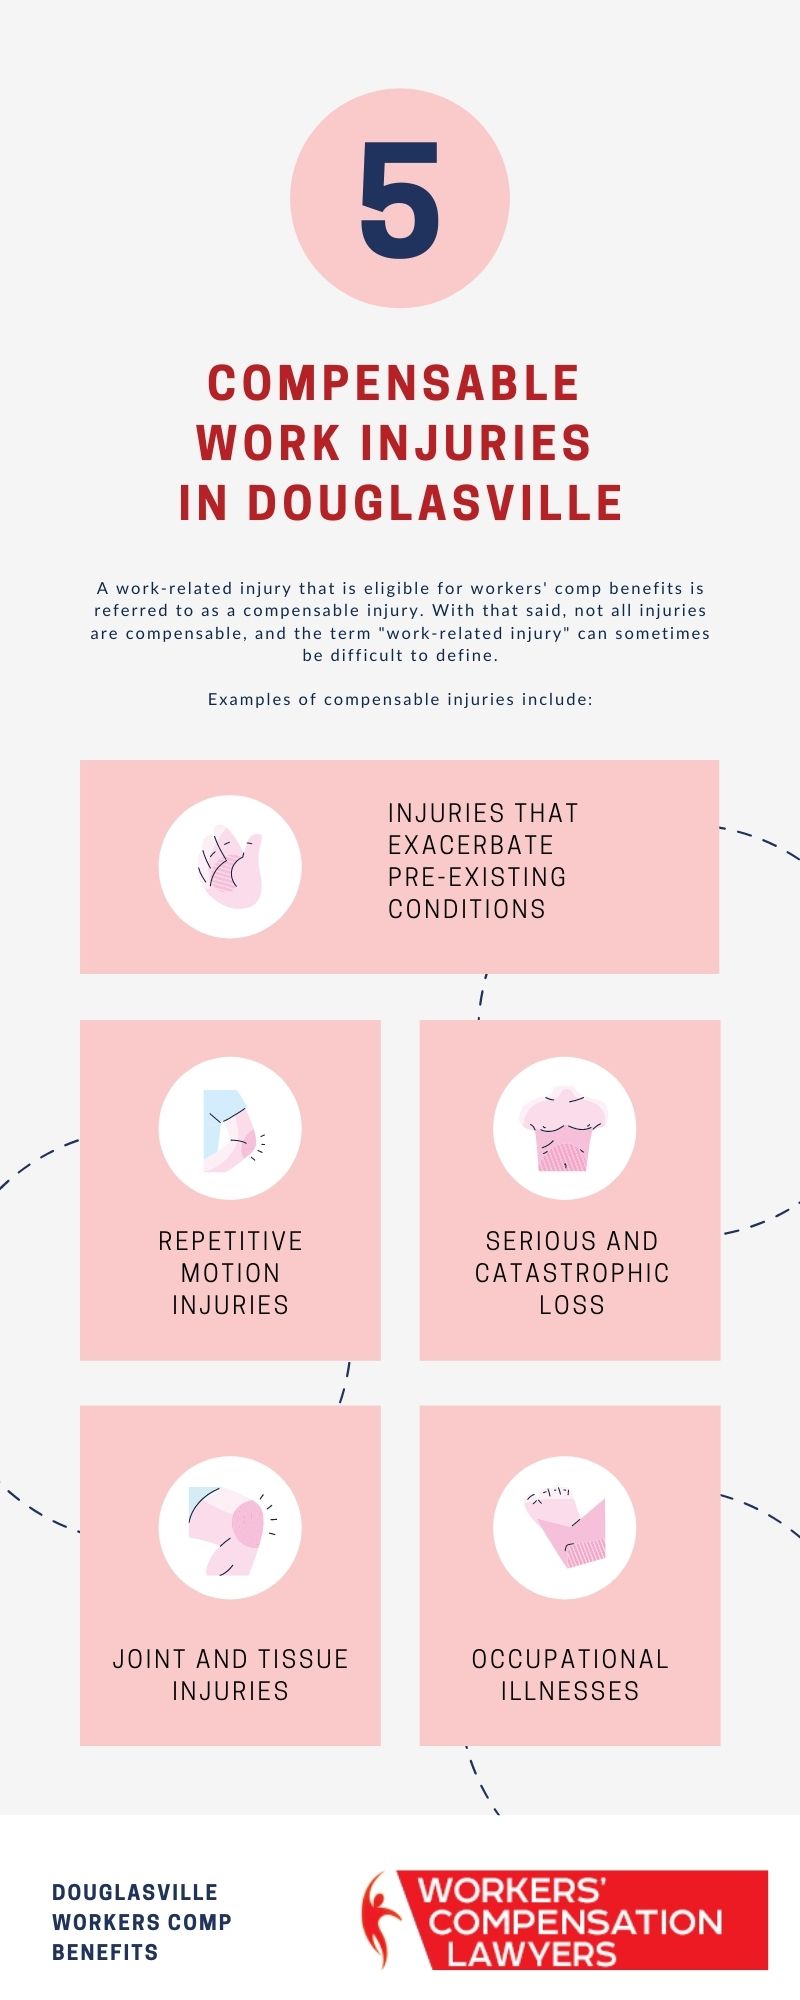 Douglasville Workers Comp Compensable Injuries Infographic